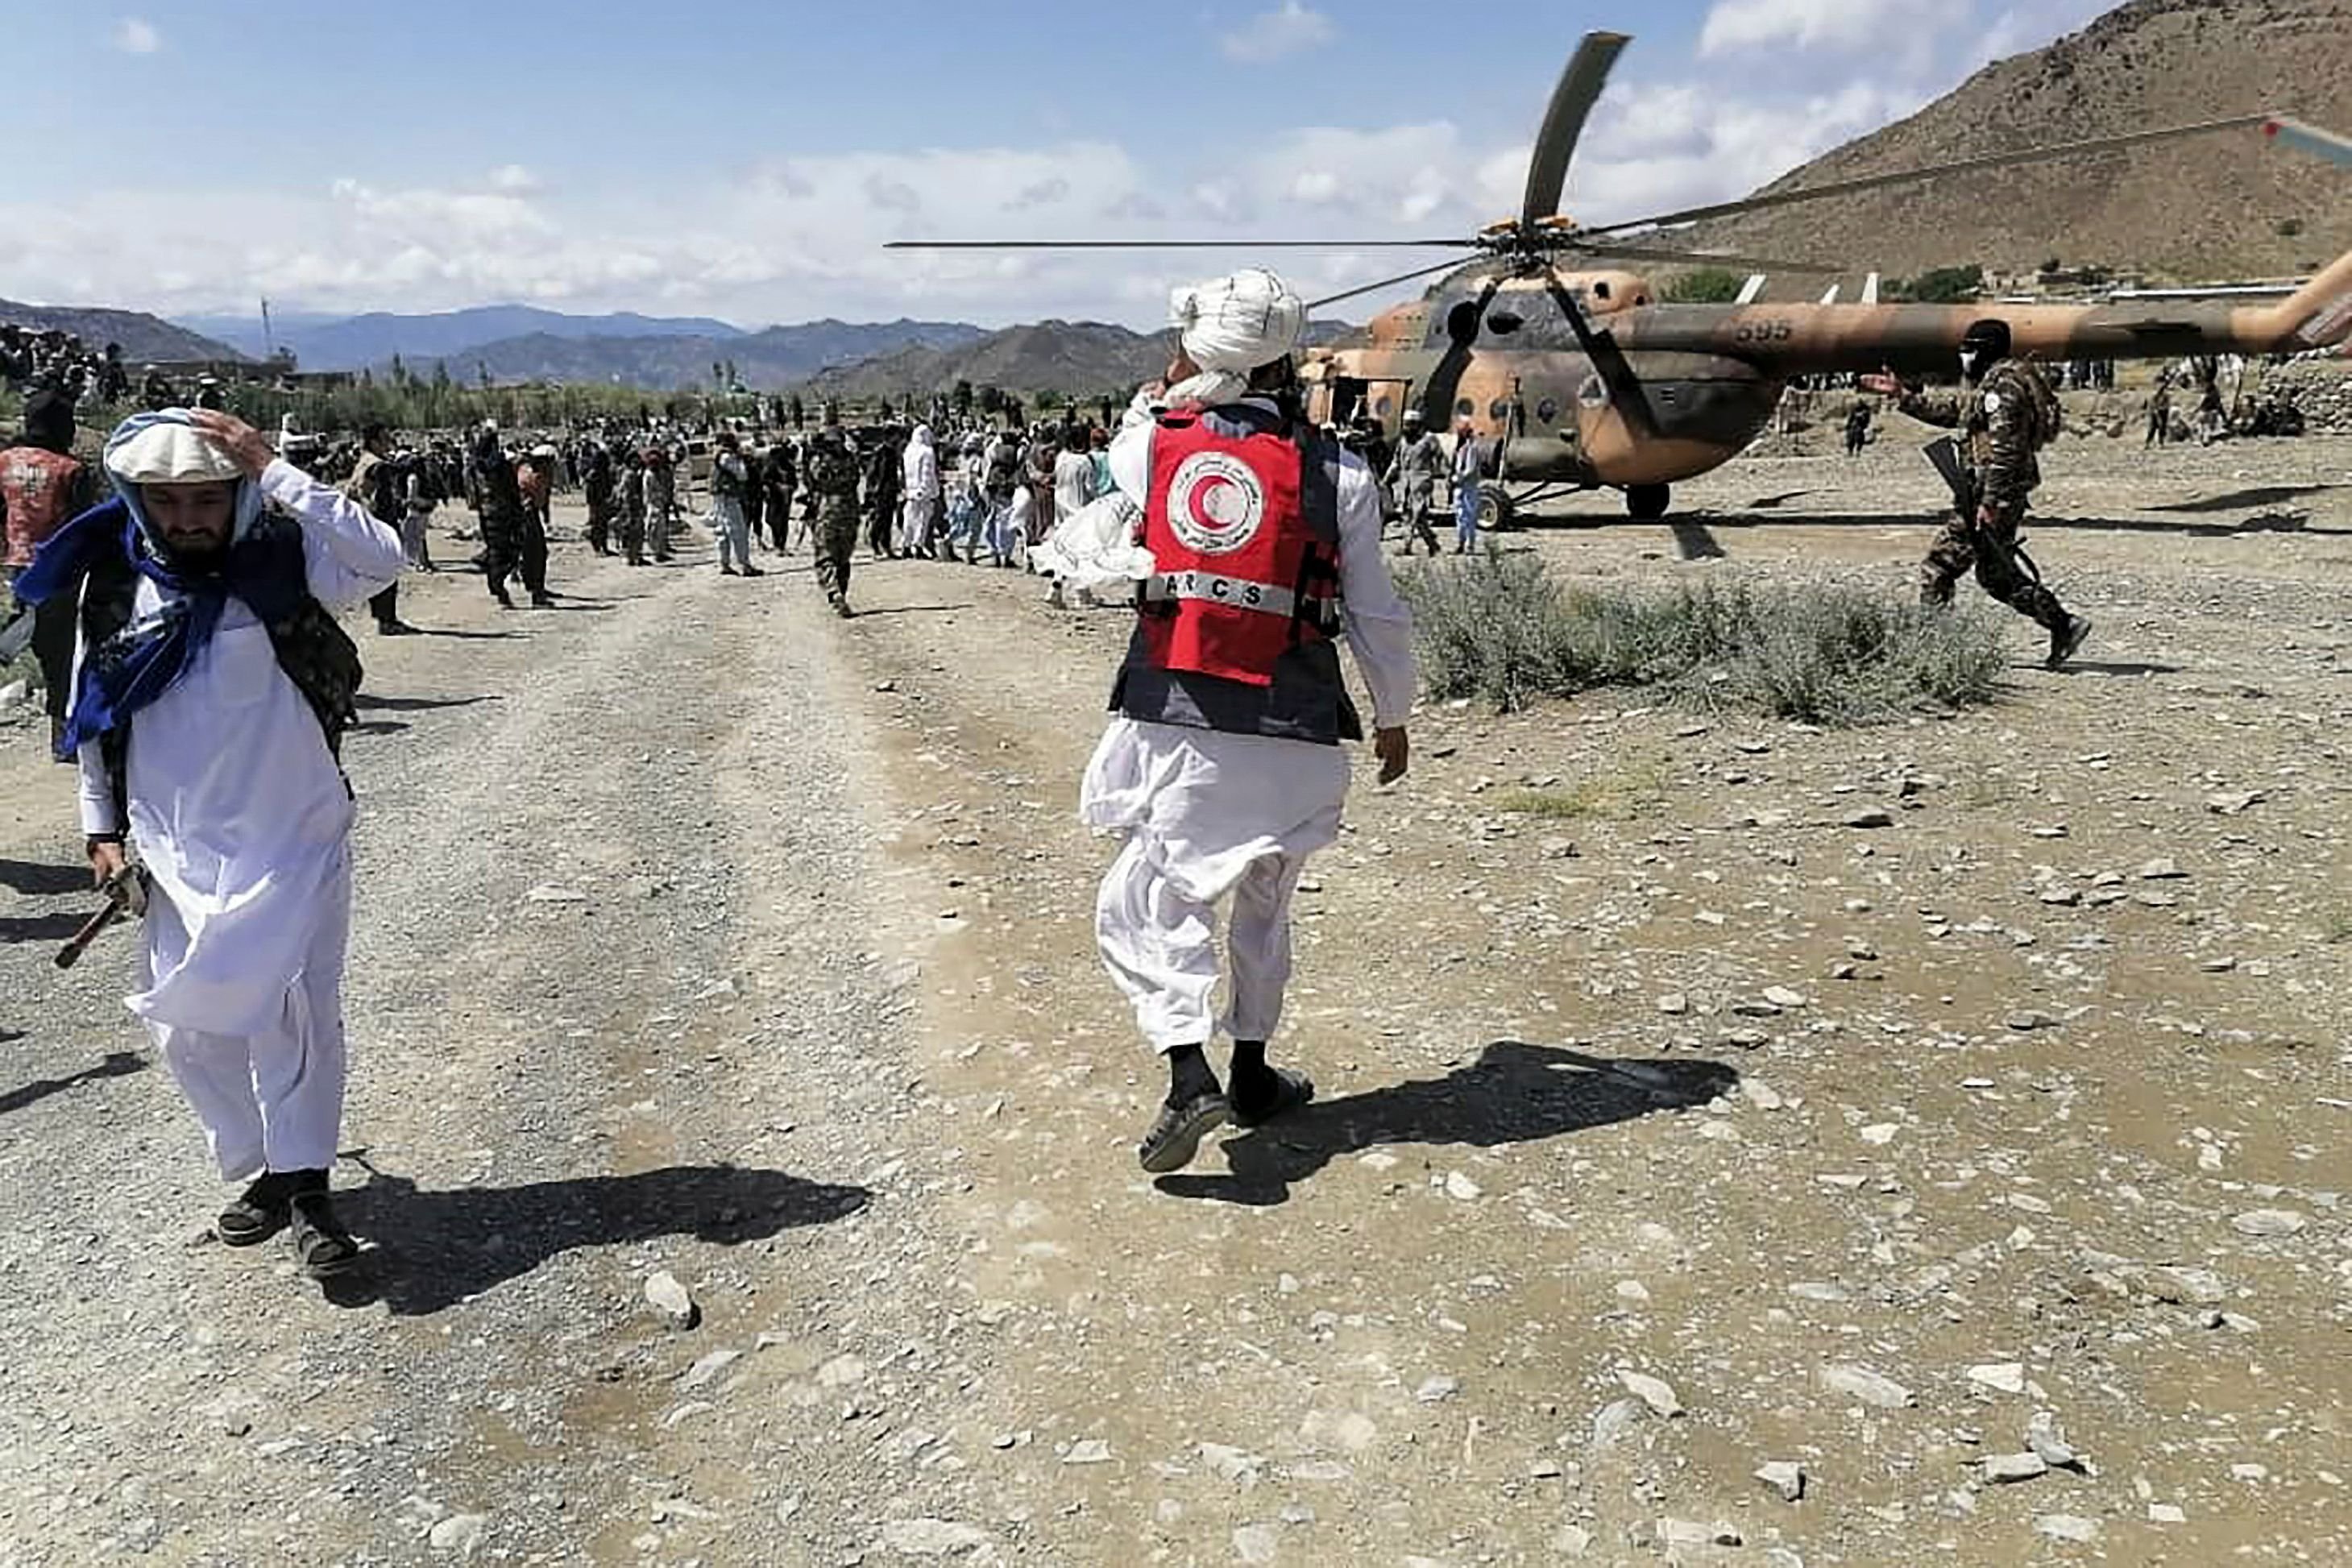 In this photo released by the state-run Bakhtar News Agency, soldiers and Afghan Red Crescent Society officials gather near a helicopter at an earthquake-hit area in the Gayan district, Paktika, eastern Afghanistan, June 22, 2022. (AFP Photo)